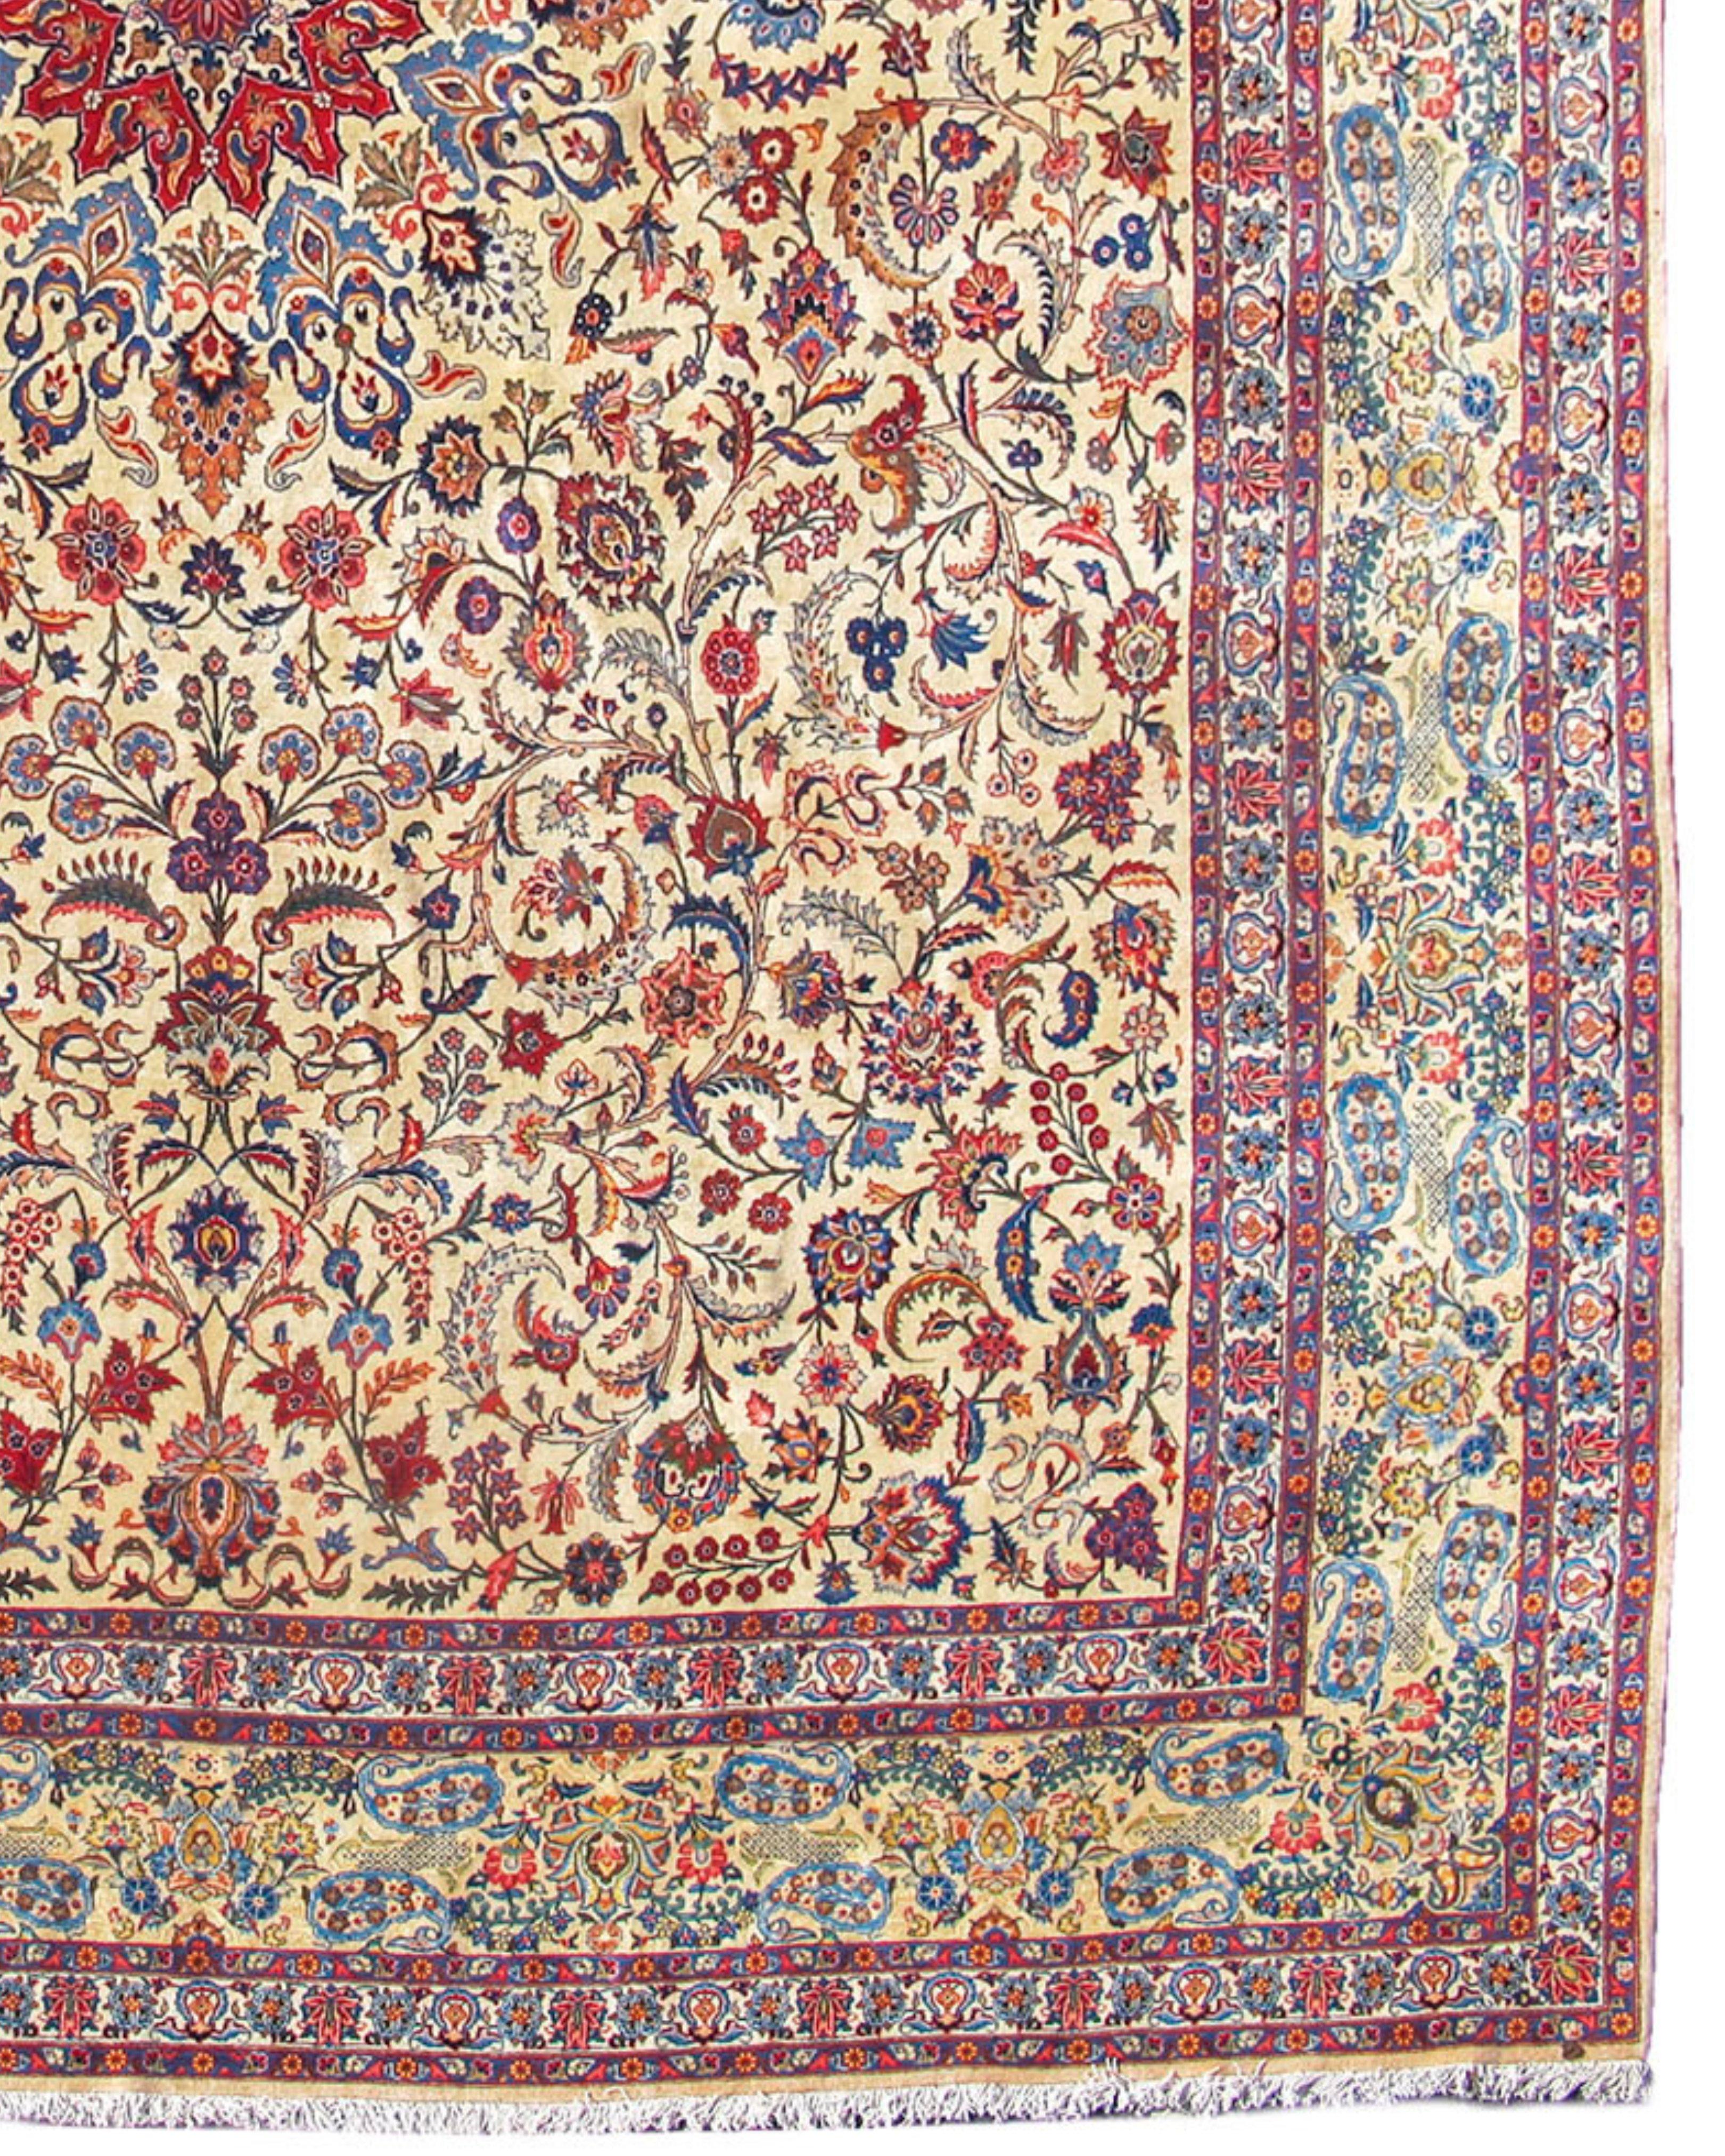 Antique Large Persian Kashan Carpet, Mid-20th century

Perfect original condition.

Additional Information:
Dimensions: 10'6